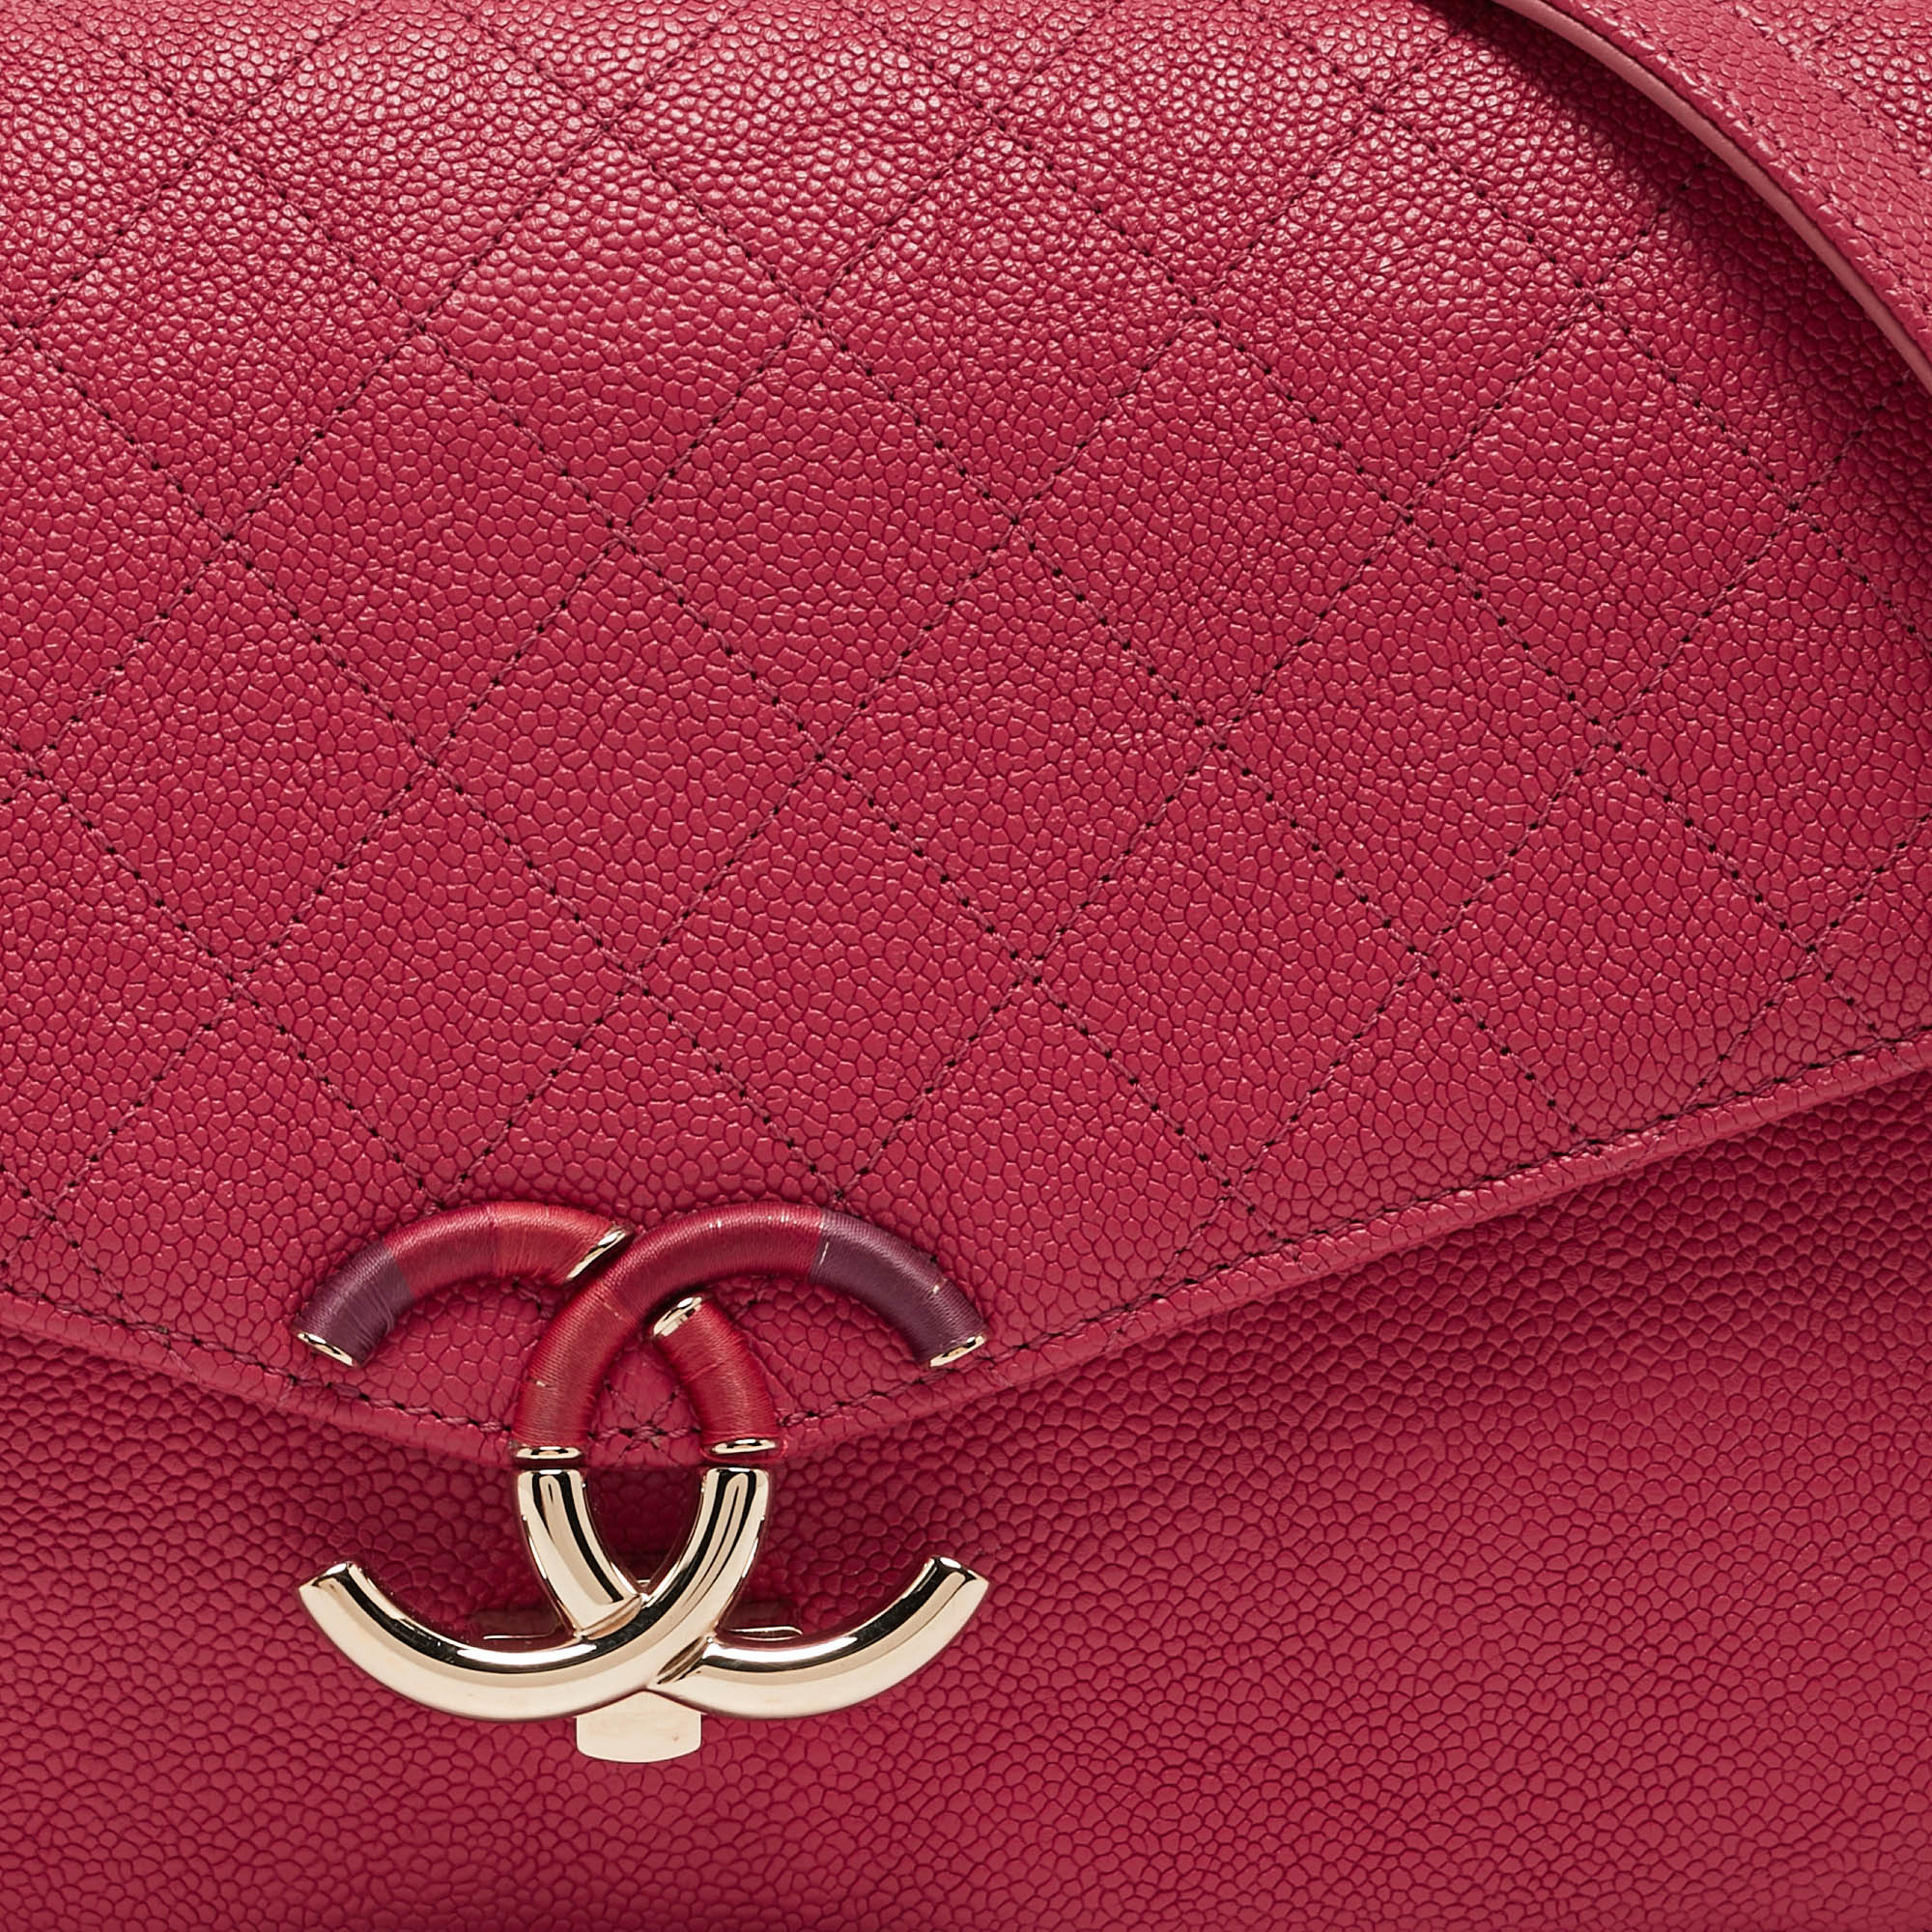 Chanel Pink Quilted Caviar Leather Thread Around Flap Bag